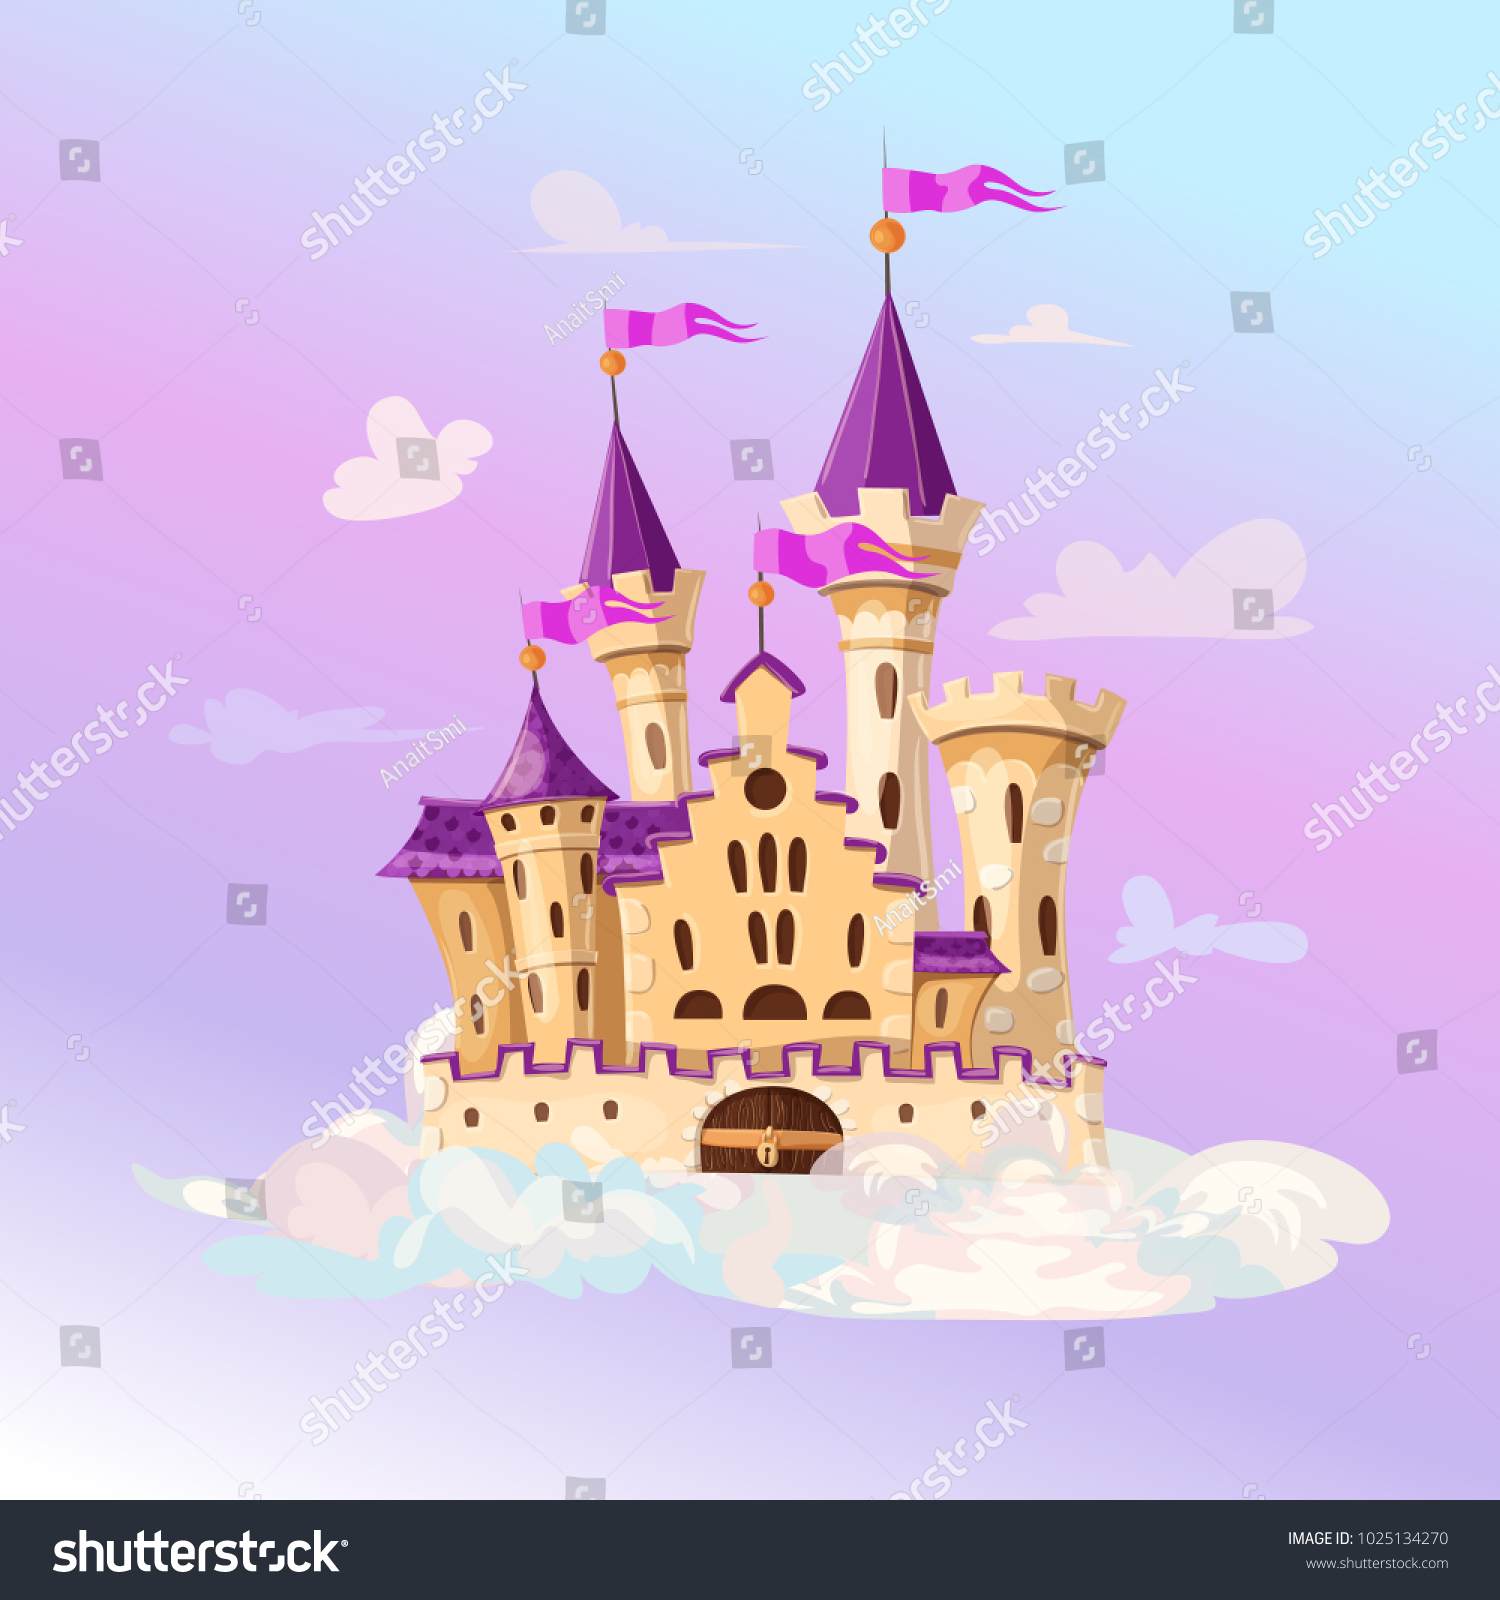 SVG of FairyTale cartoon castle. Cute cartoon castle. Fantasy flying island with fairy tale palace in clouds. Vector illustration svg